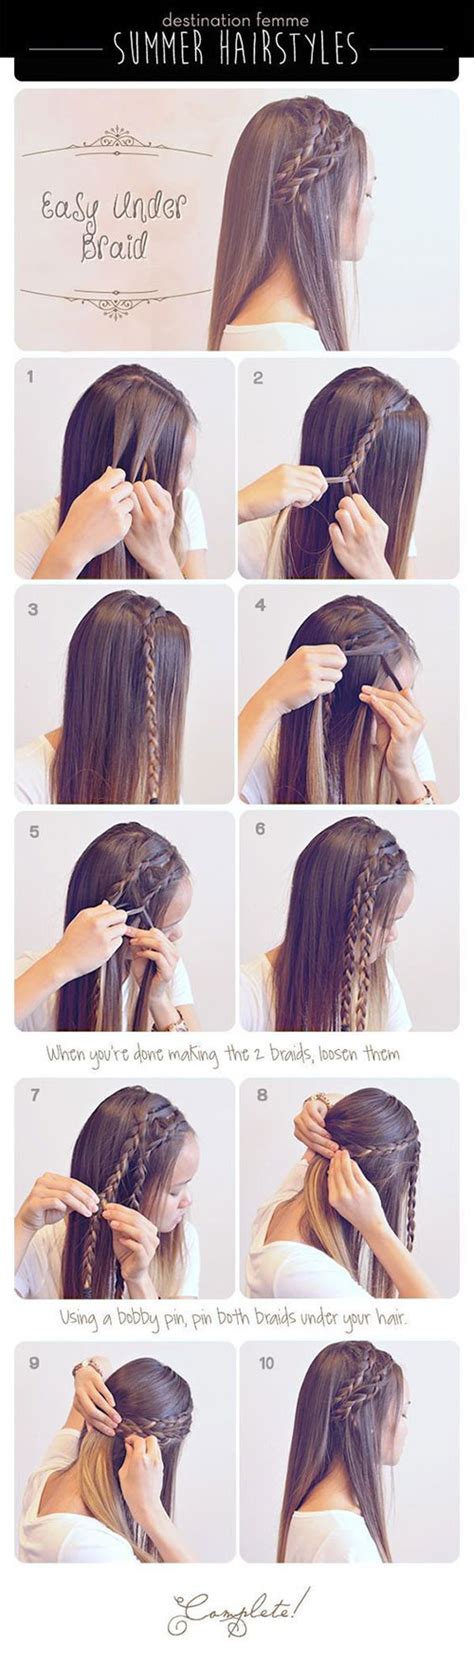 Are you looking for easy. 12+ Easy Step By Step Summer Hairstyle Tutorials For ...